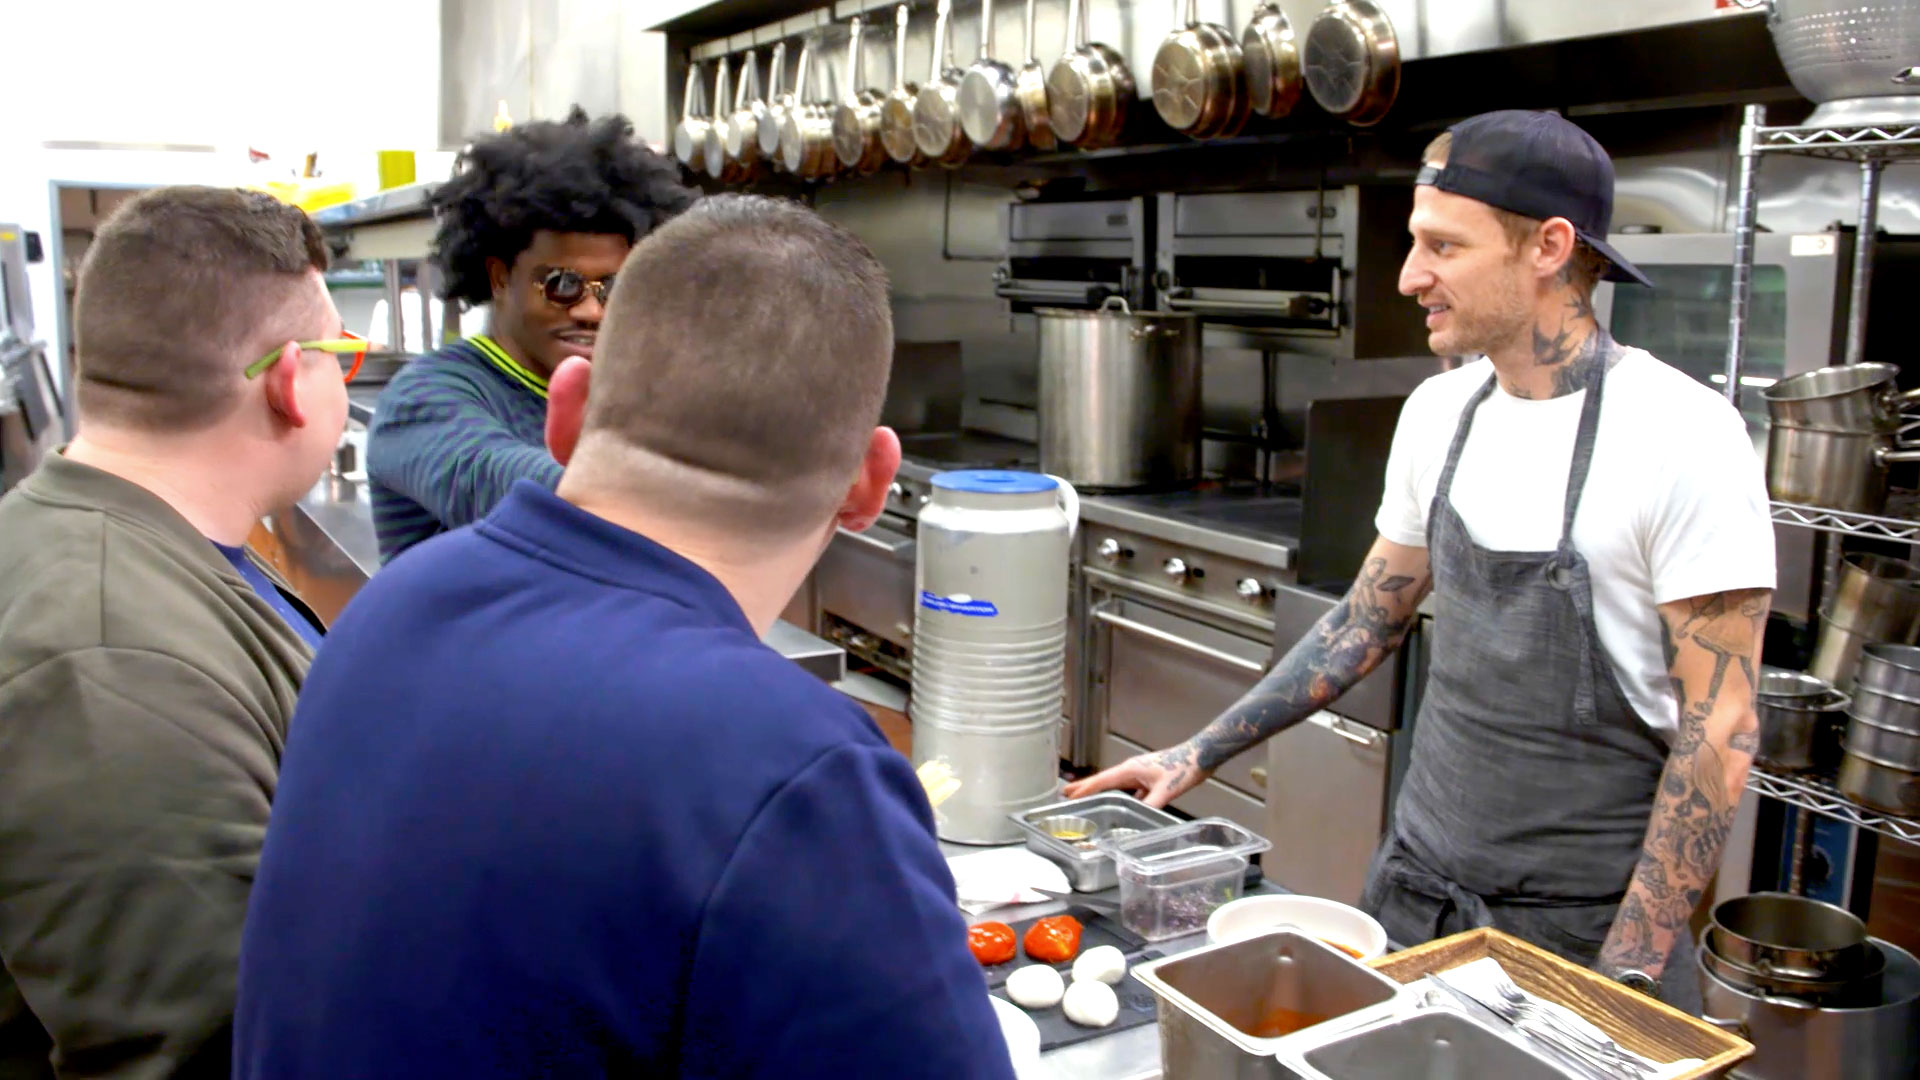 How Hip Hop Artist Smino and Chef Michael Voltaggio Tell Stories Through Their Music and Food...